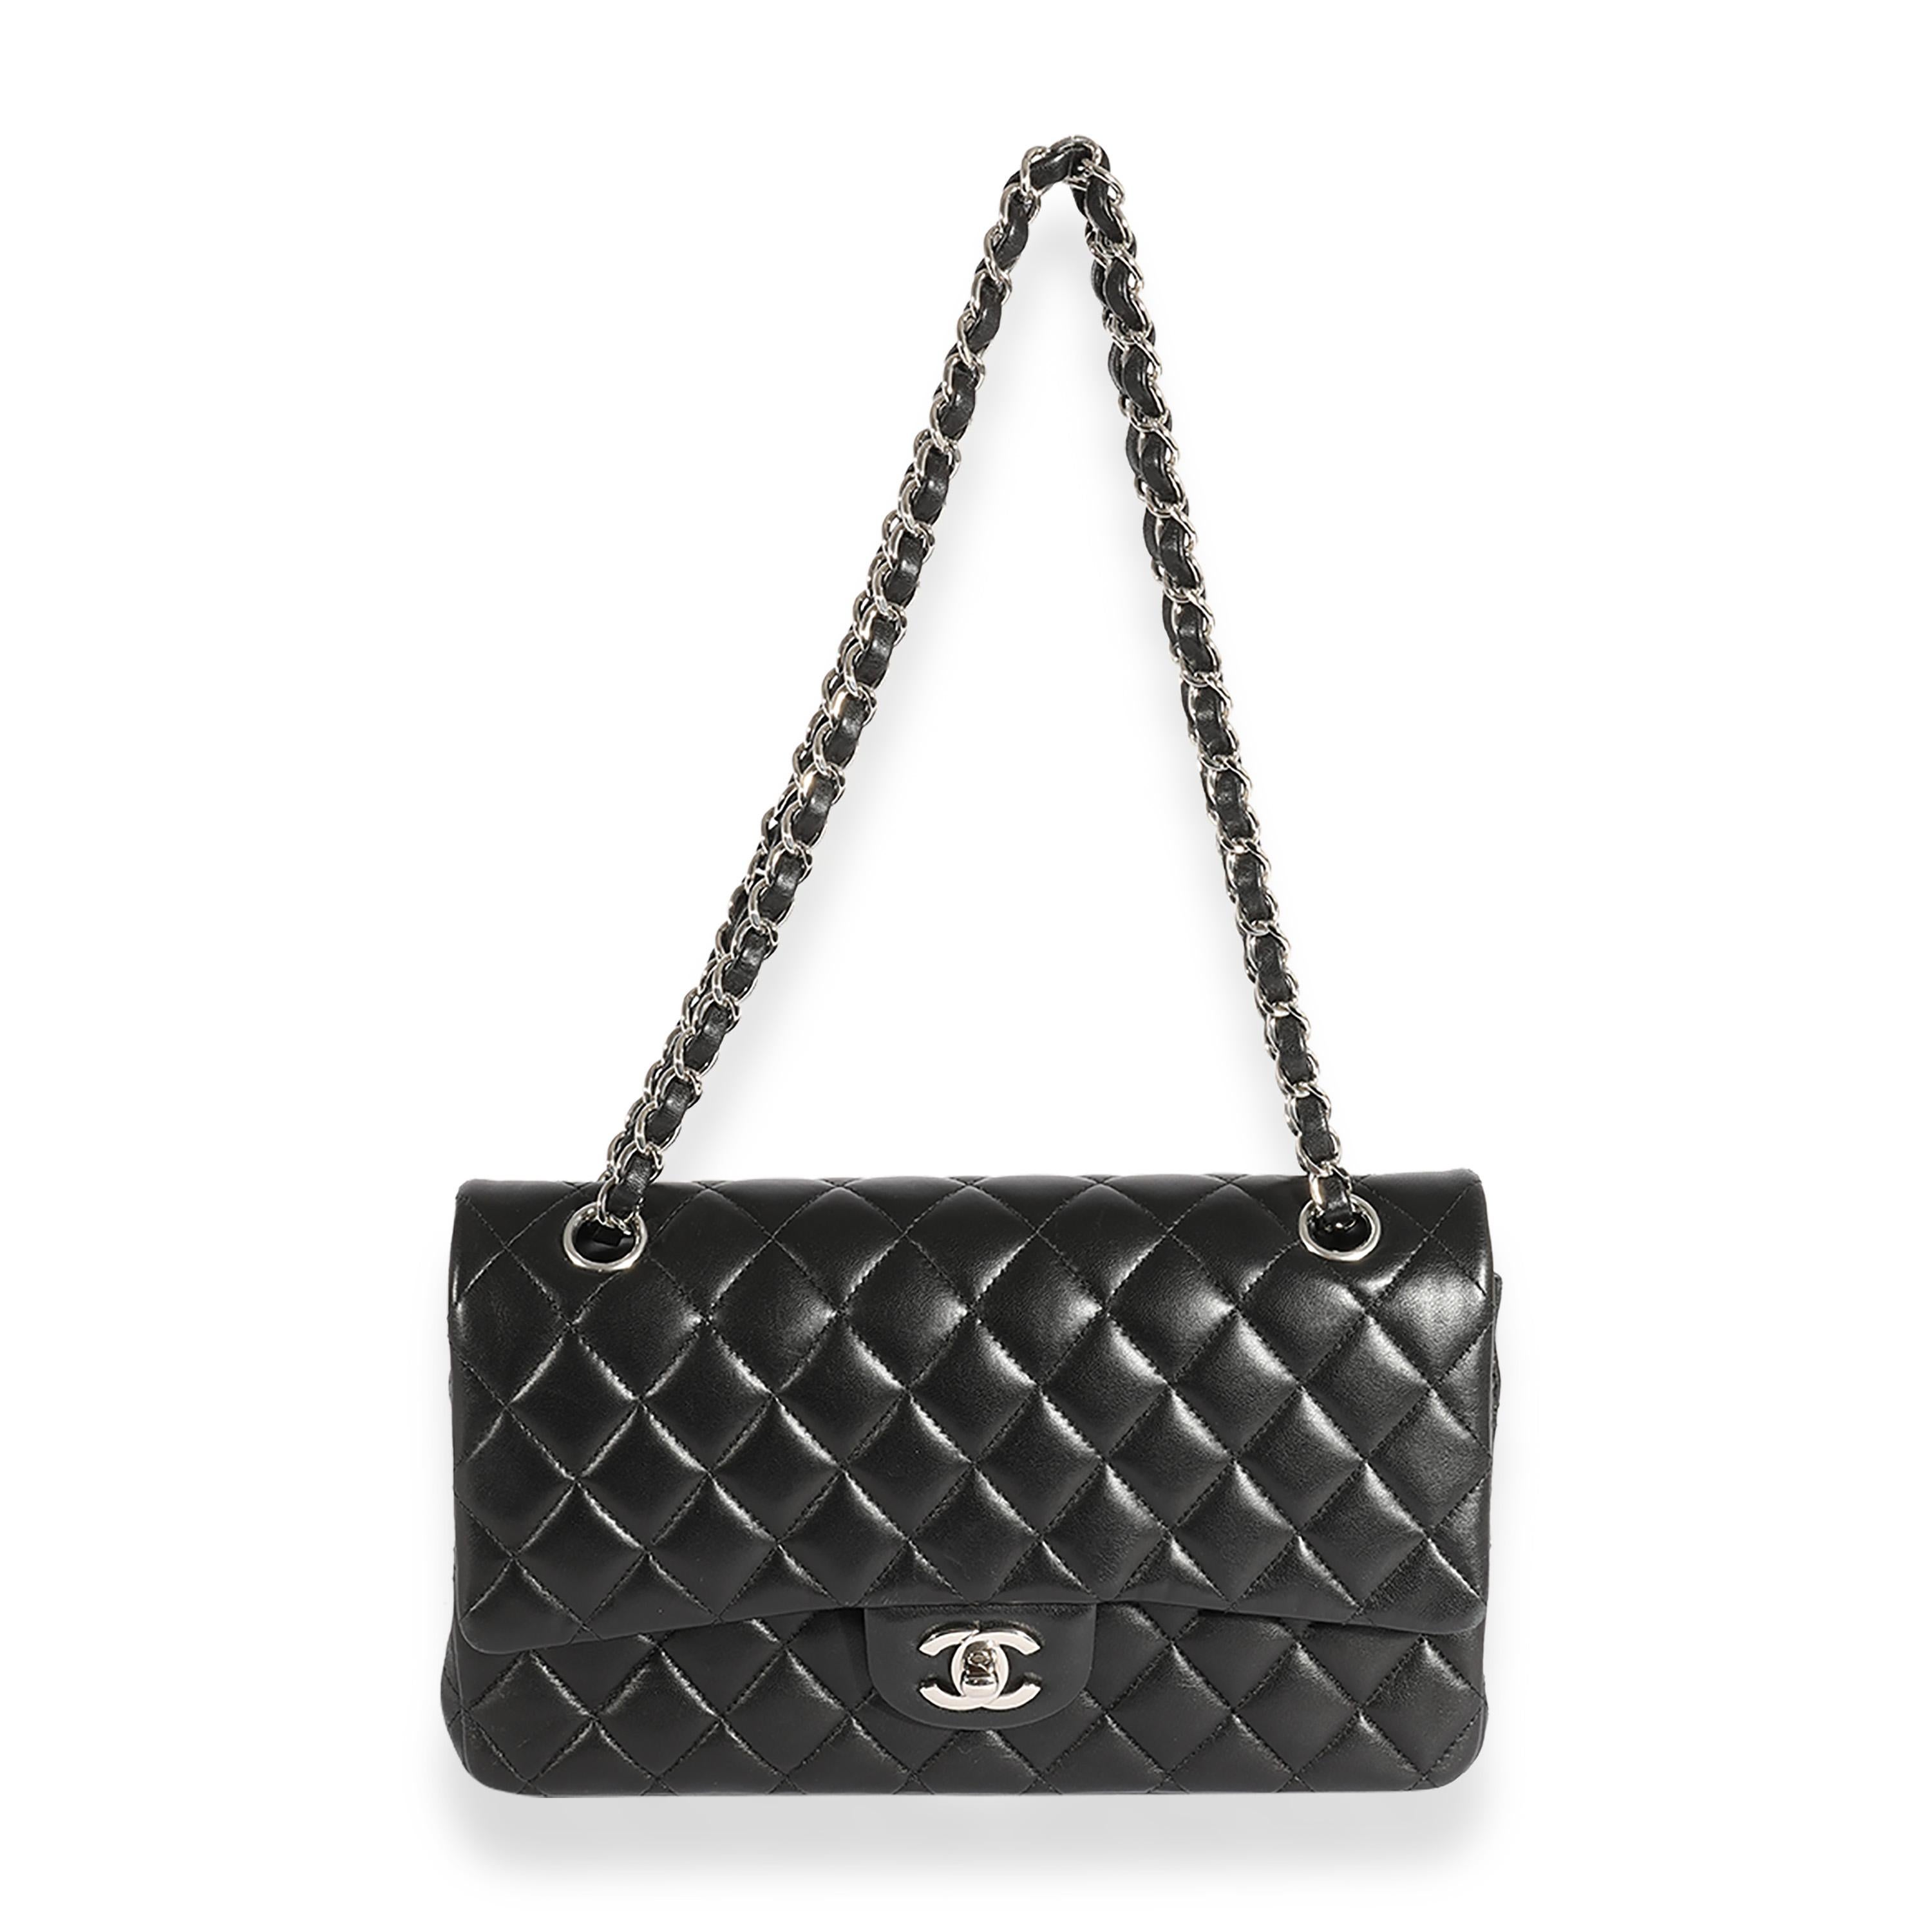 Listing Title: Chanel Black Quilted Lambskin Medium Classic Double Flap Bag
SKU: 123588
MSRP: 8800.00
Condition: Pre-owned 
Handbag Condition: Very Good
Condition Comments: Very Good Condition. Scuffing to corners and throughout exterior. Scratching